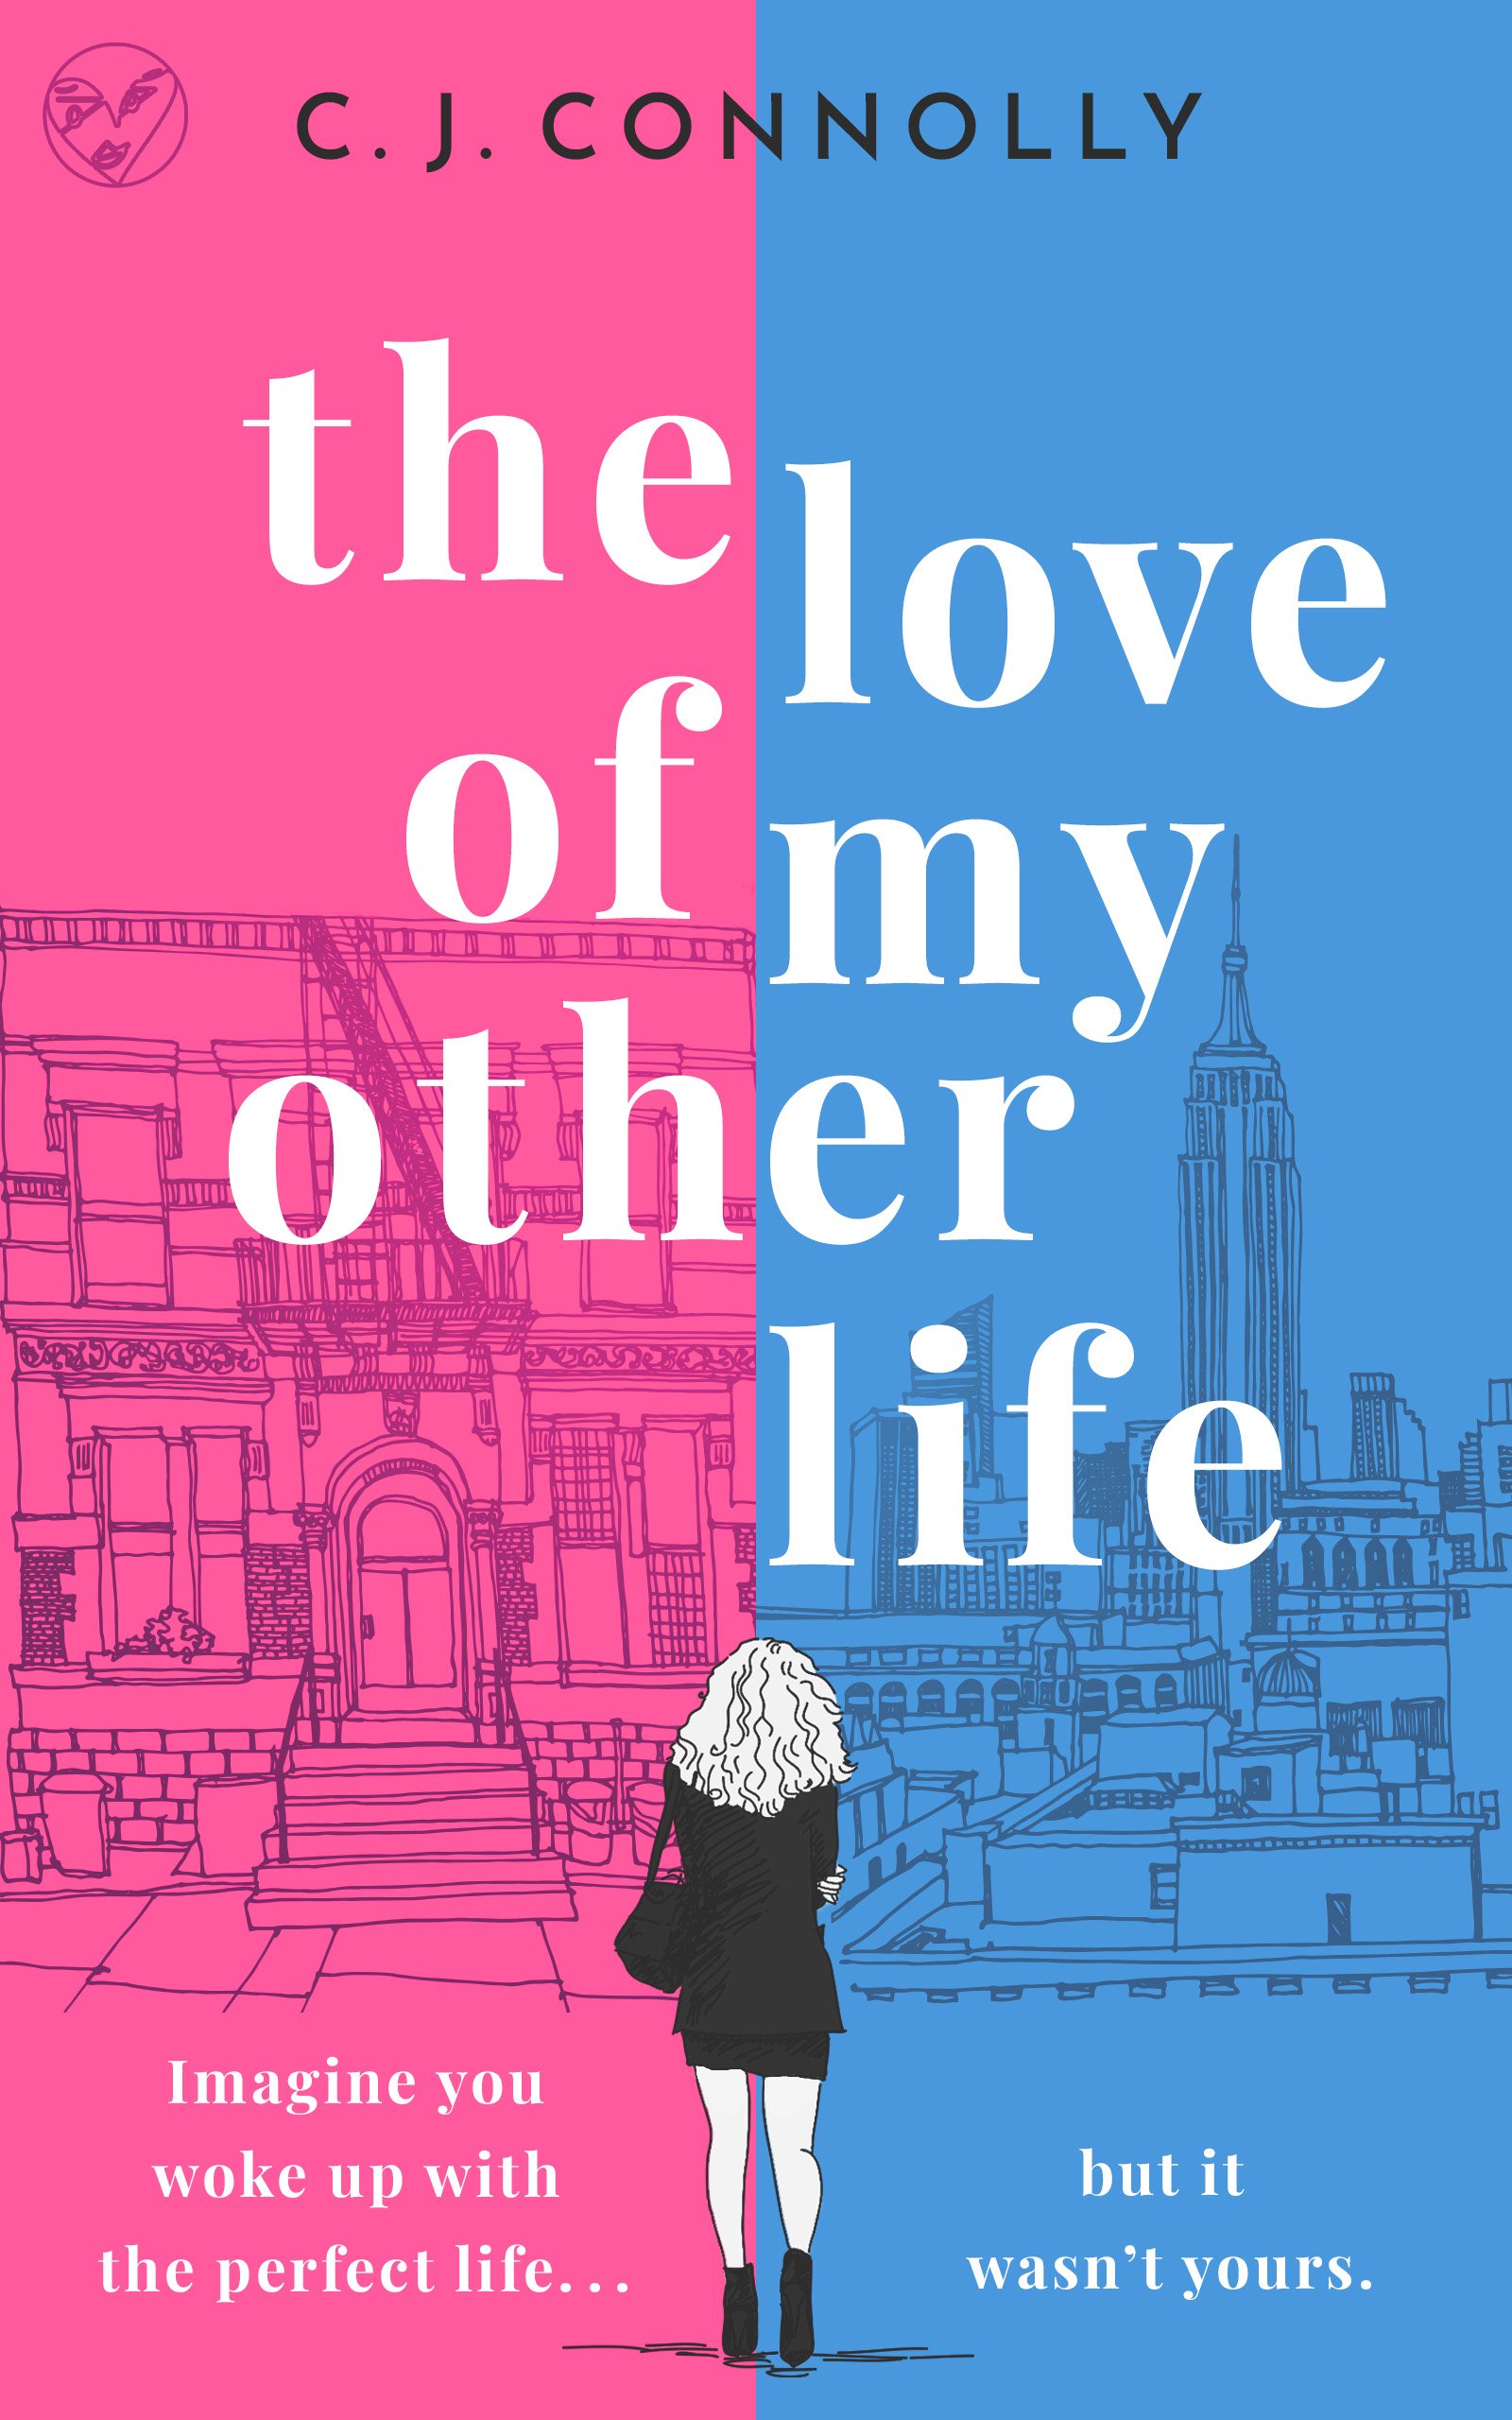 THE LOVE OF MY OTHER LIFE Cover publish updated logo.jpg